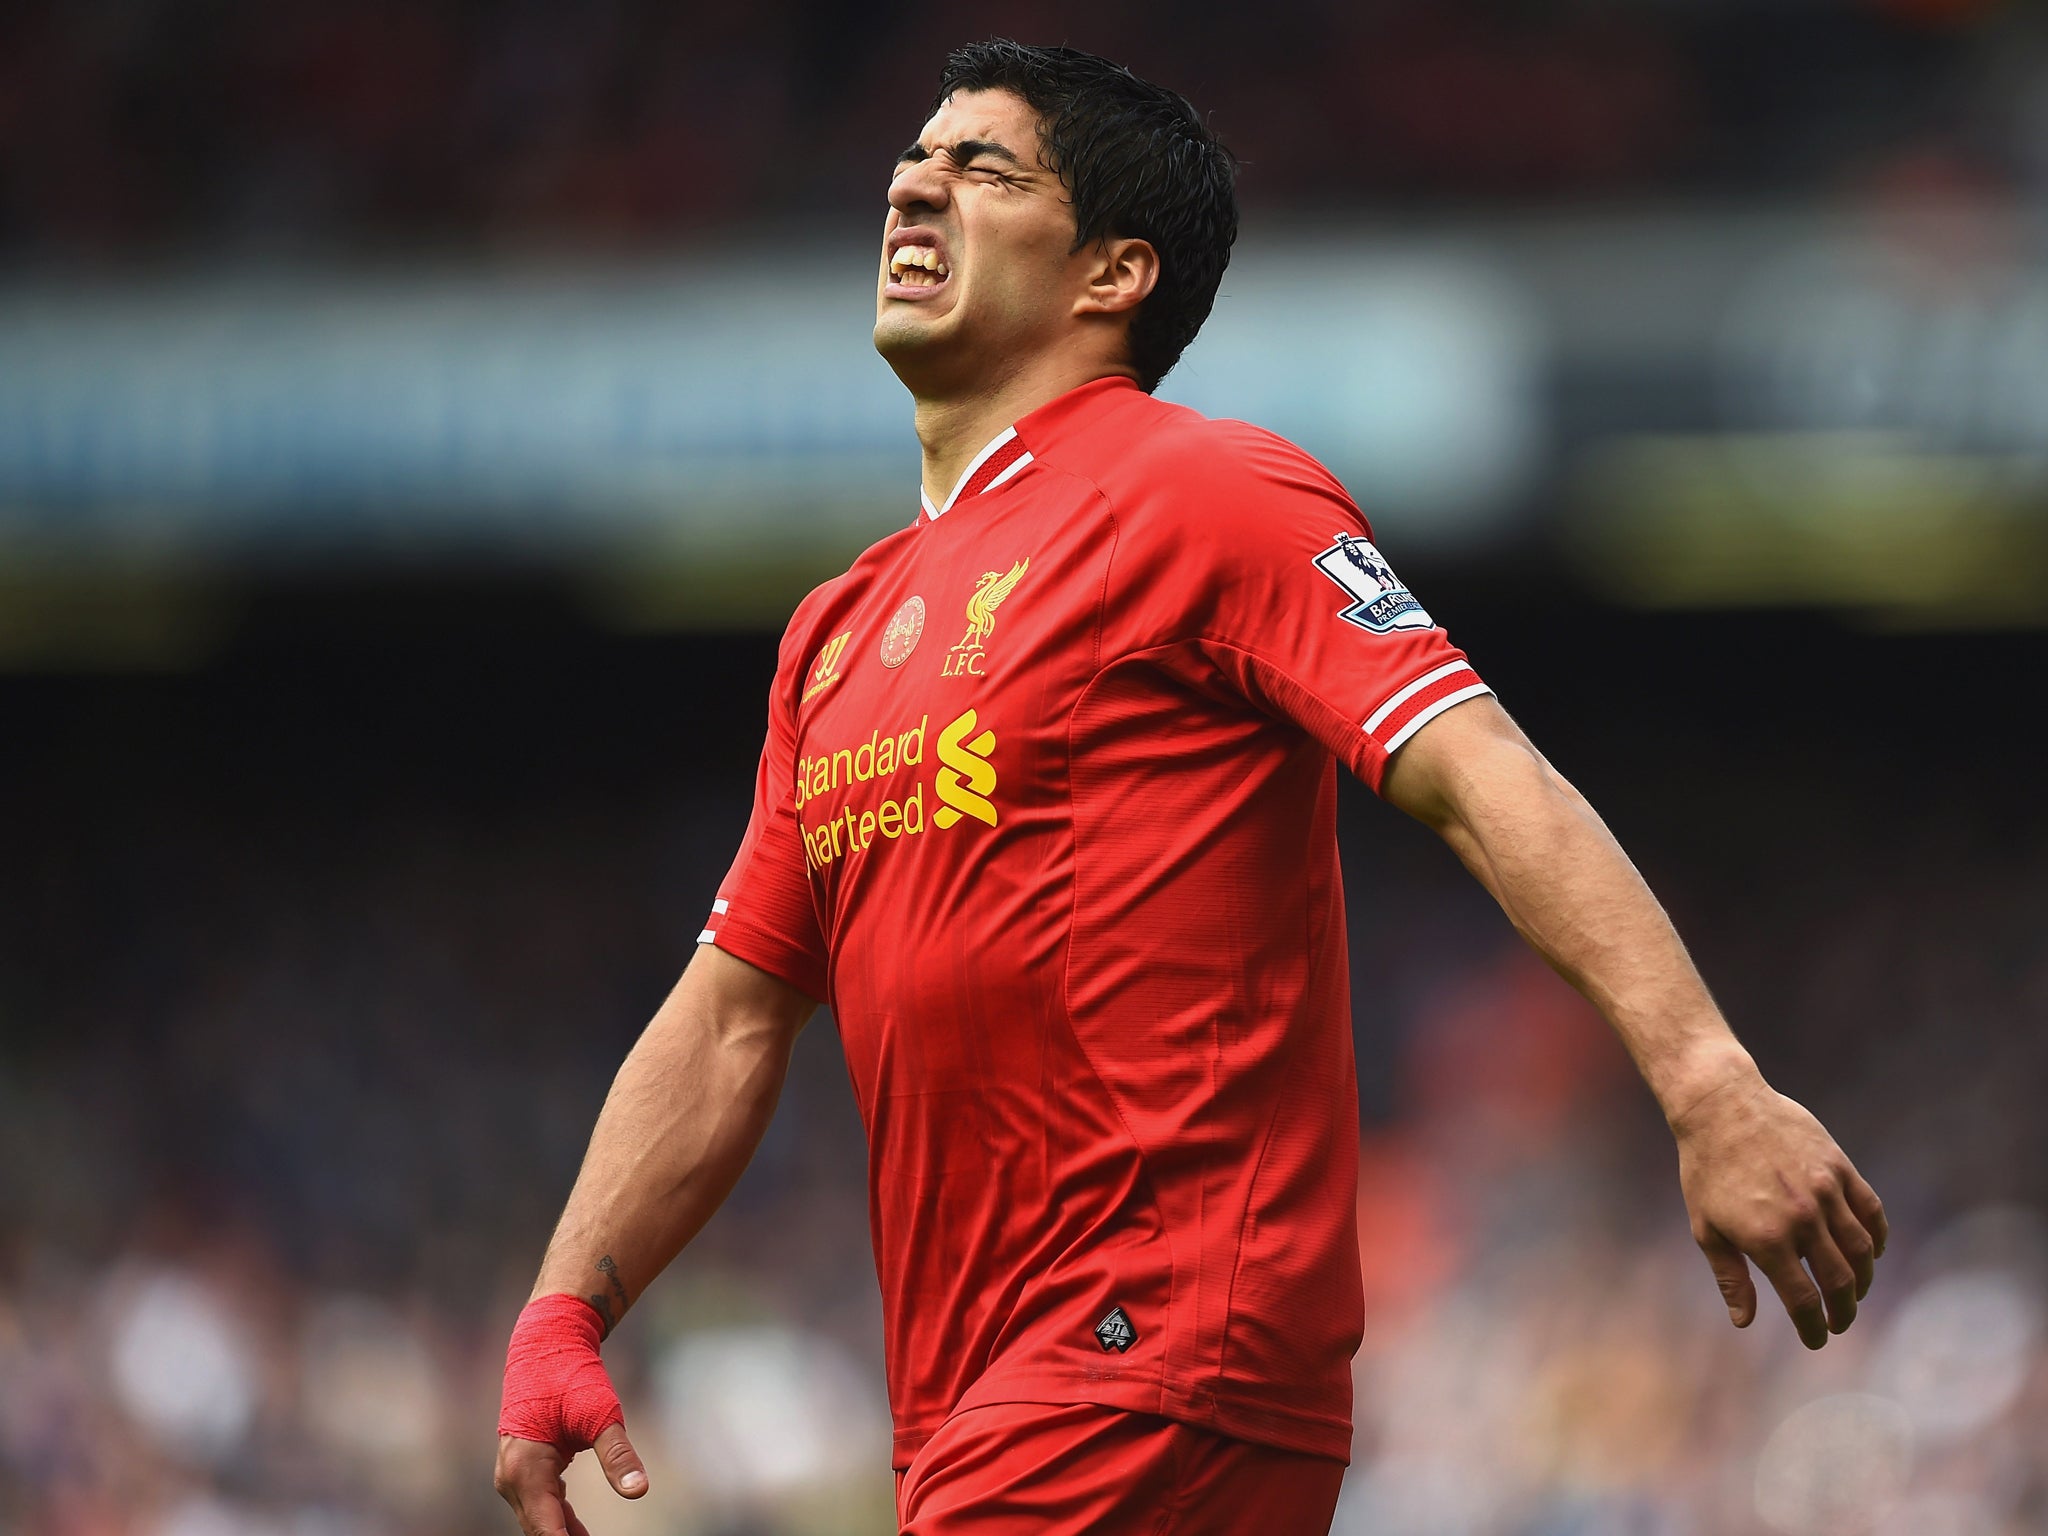 Luis Suarez can't believe it as his goal is disallowed